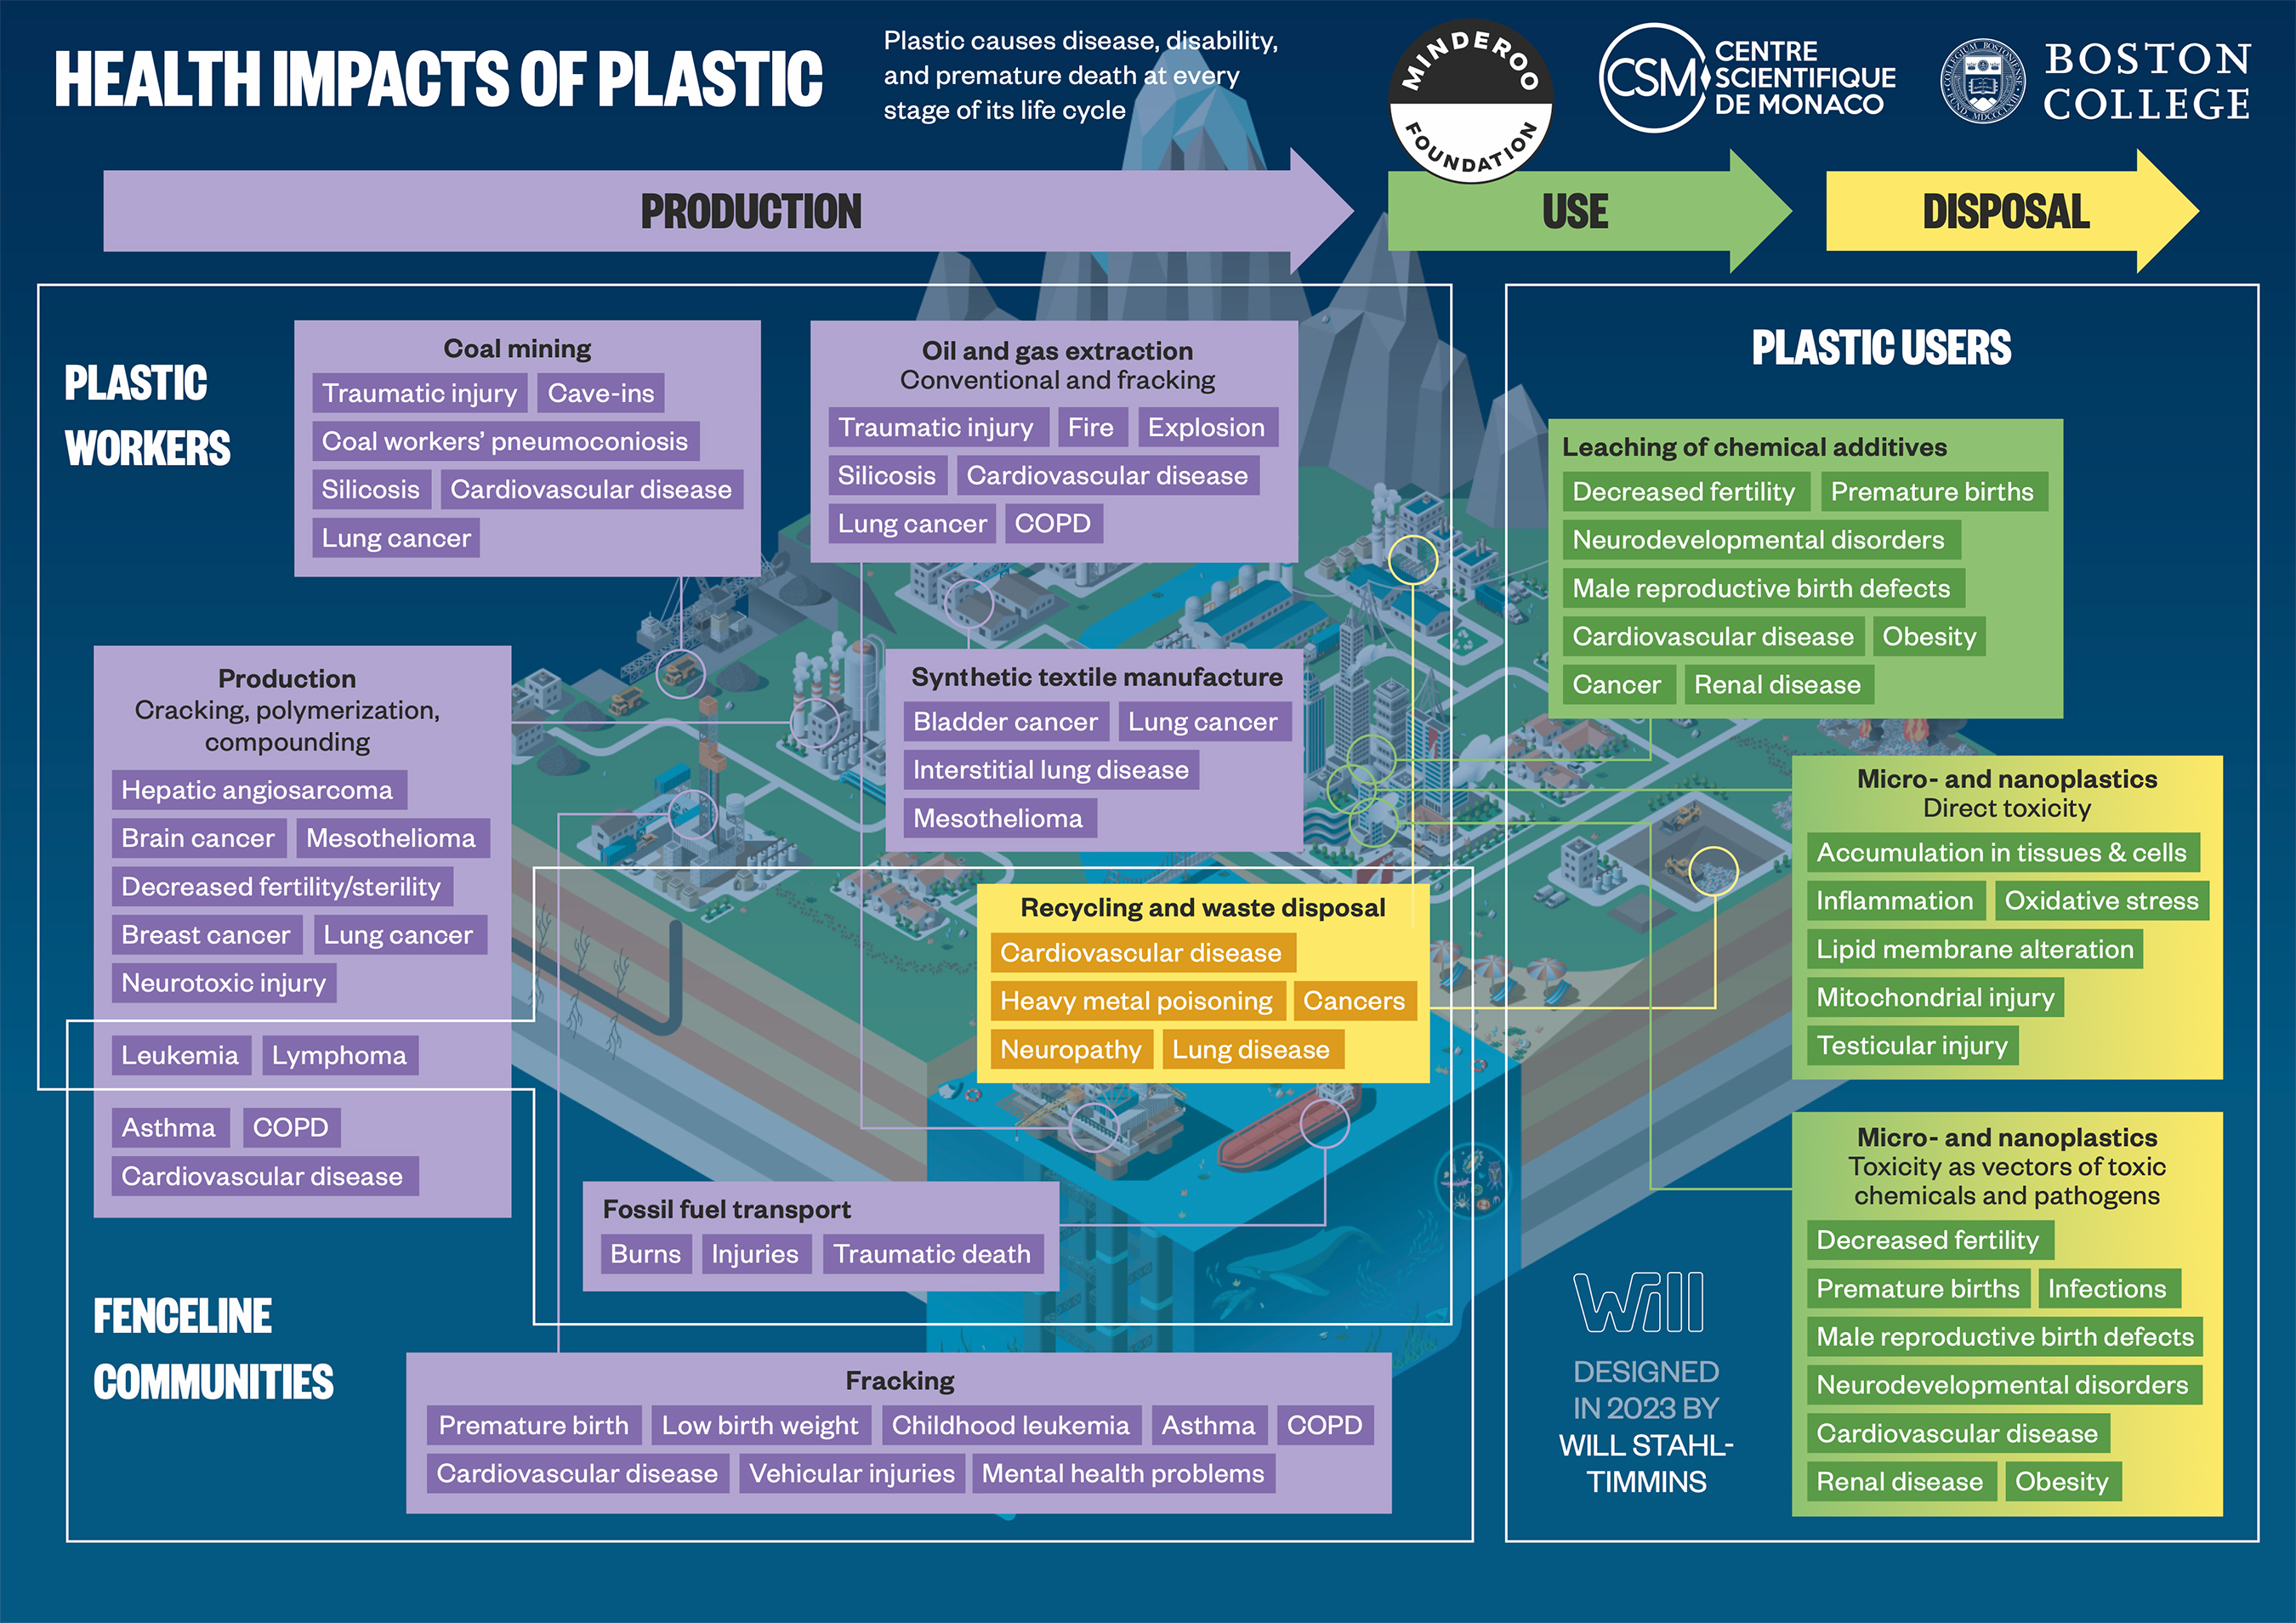 This infographic details the health impacts of plastic. It describes the health impacts of plastic production, use and disposal. Production: health impacts on plastic workers and fence-line communities. Plastic workers: coal mining impacts include traumatic injury, cave-ins, coal workers pneumoconiosis, Silicosis, cardiovascular disease and lung disease; Oil and gas extraction (conventional and fracking) is associated with traumatic injury, fire, explosion, Silicosis, cardiovascular disease, lung disease and COPD; Synthetic textile manufacture can cause bladder cancer, lung cancer, interstitial lung disease and mesothelioma. Plastic production, such as cracking, polymerisation and compounding is associated with hepatic angiosarcoma, brain cancer, mesothelioma, decreased fertility/sterility, breast cancer, lung cancer, neurotoxic injury, leukaemia, lymphoma, asthma, COPD and cardiovascular disease. We also need to consider fossil fuel transportation, which is associated with burns, injuries and traumatic death. Fracking has effects on fence-line communities and has been known to cause premature birth, low birth weight, childhood leukaemia, asthma, COPD, cardiovascular disease, vehicular injuries and mental health problems. Looking next at plastic use: plastic users can be effected by the leaching of chemical additives, causing decreased fertility, premature births, neurodevelopmental disorders, male reproductive birth defects, obesity , cancer and renal disease; micro- and nano-plastics, causing direct toxicity and associated with accumulation in tissues and cells, inflammation oxidative stress, lipid membrane alteration, mitochondrial injury and testicular injury; micro- and nano-plastics acting as vectors for toxic chemical and pathogens and resulting in decreased fertility, premature births, infections, male reproductive birth defects, neurodevelopmental disorders, cardiovascular disease, renal disease and obesity. Finally looking at plastic recycling and waste disposal. This is associated with cardiovascular disease, heavy metal poisoning, cancers, neuropathy and lung disease. Alt text